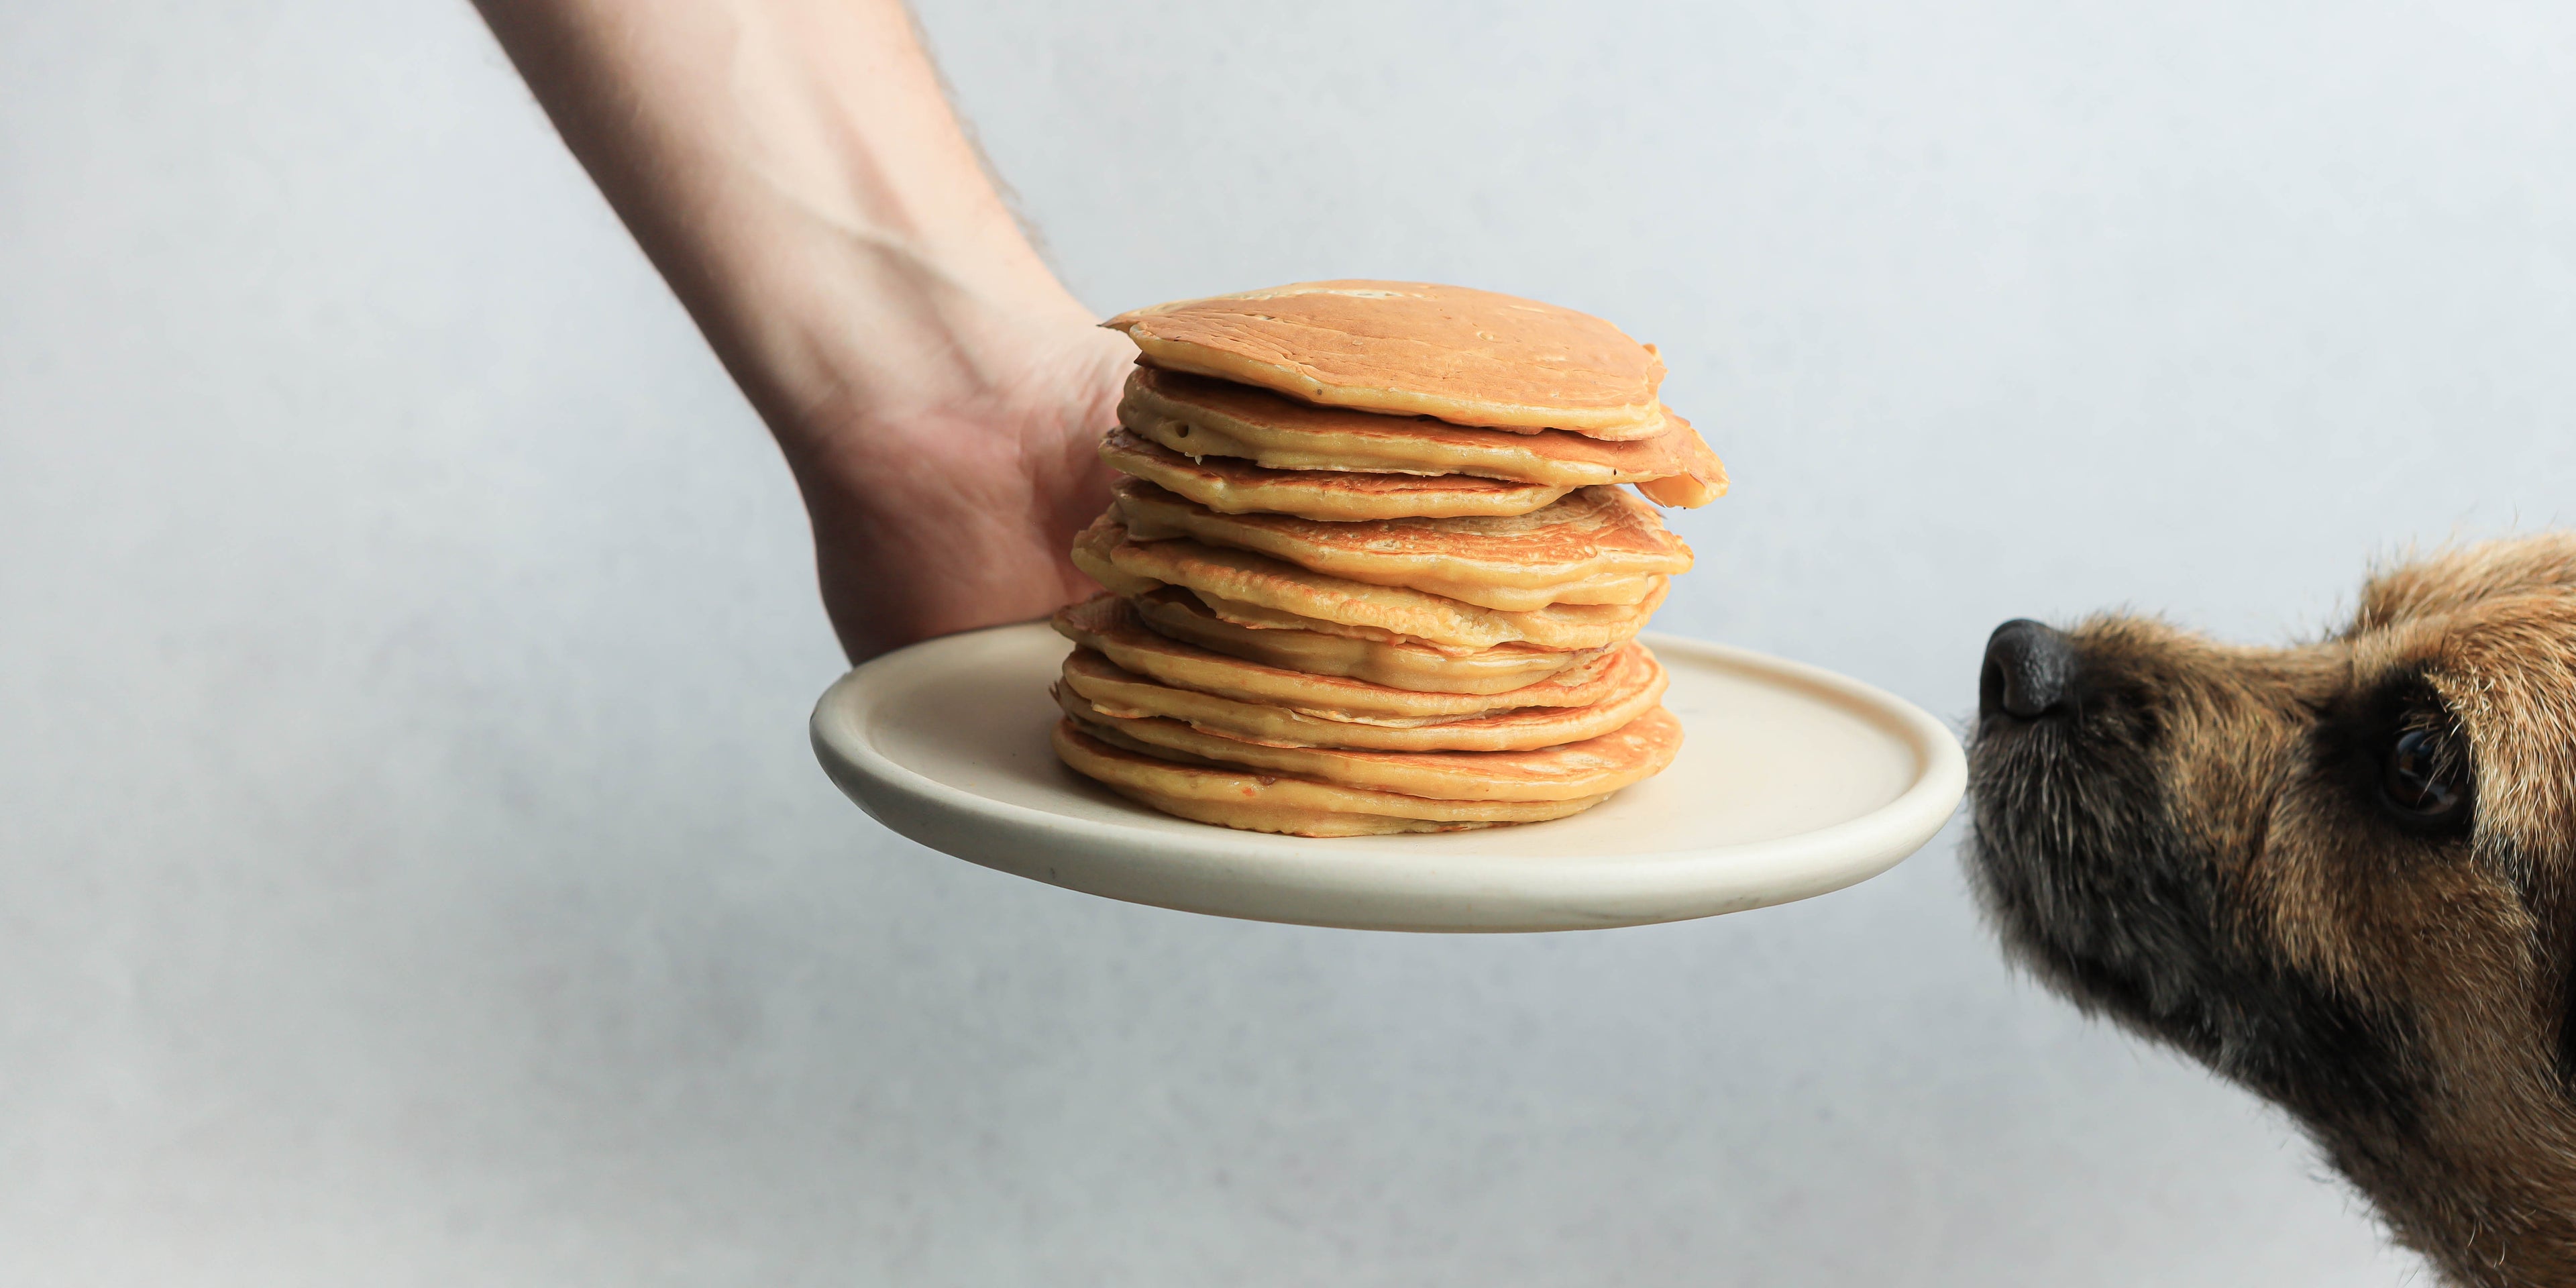 Hand holding a white plate with a stack of pancakes on it and a small brown dog to the right hand side sniffing the plate